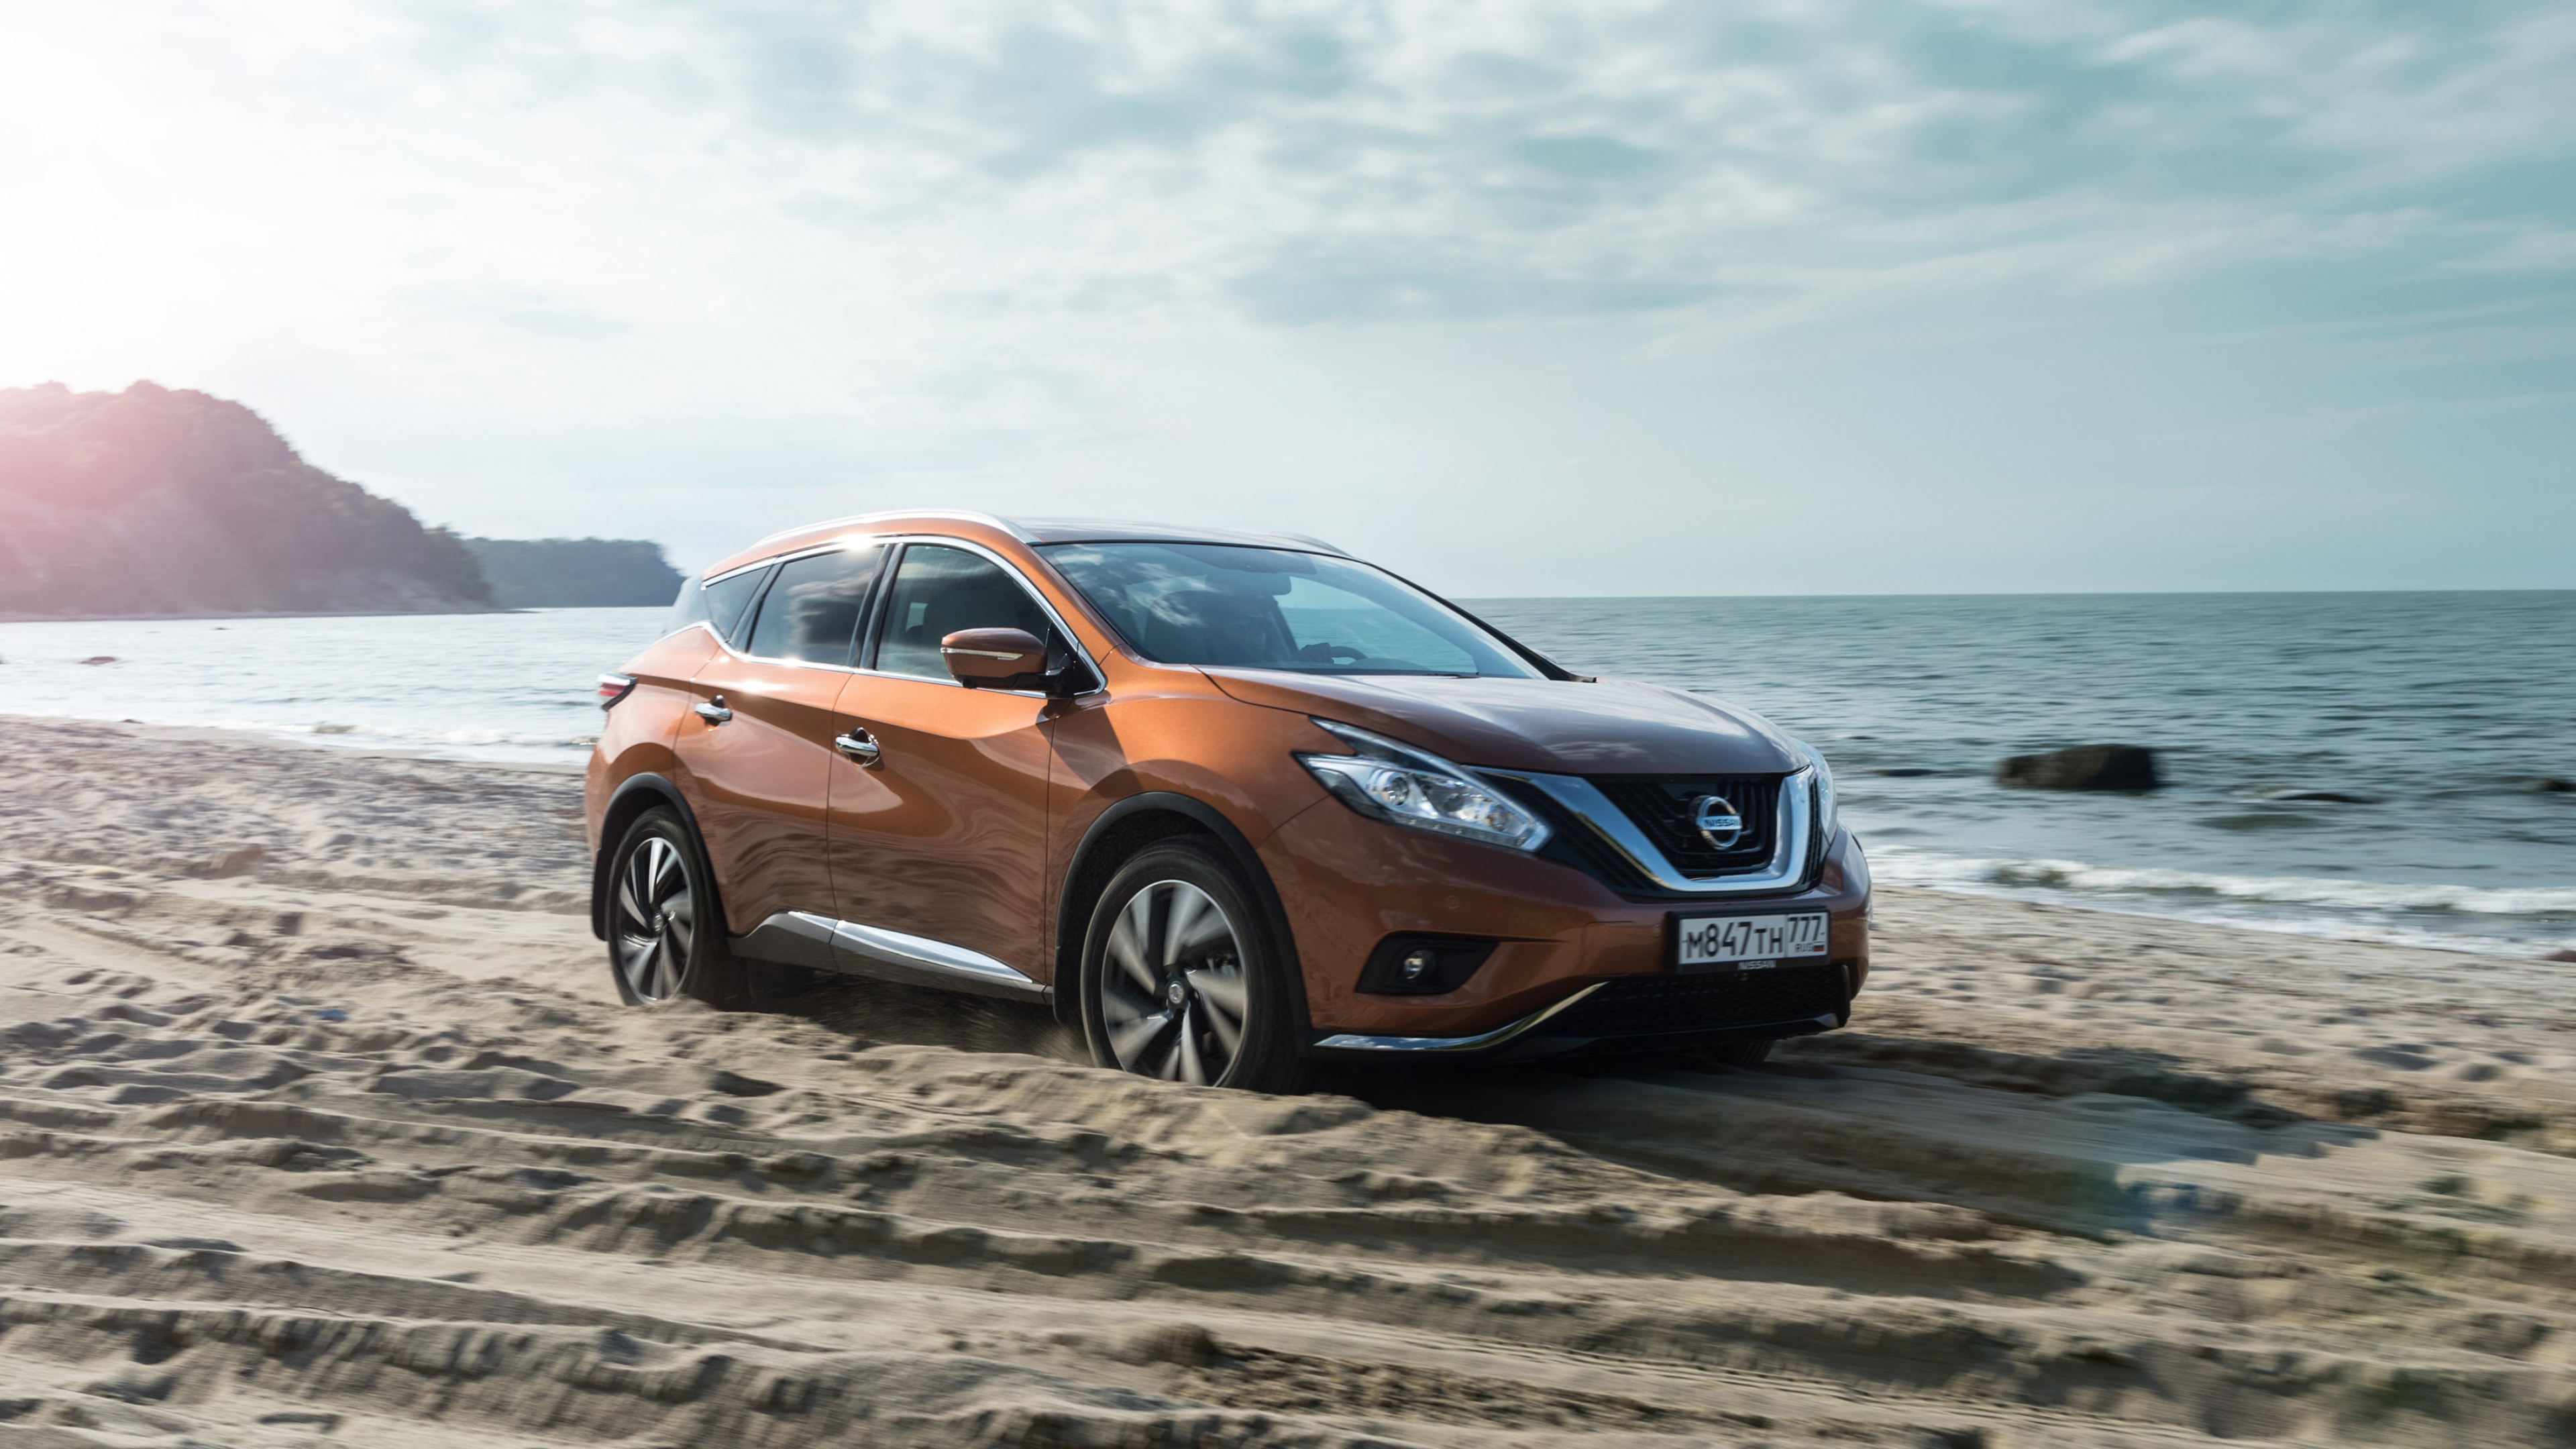 Nissan Murano, Stylish crossover, Spacious interior, Advanced safety features, 3840x2160 4K Desktop